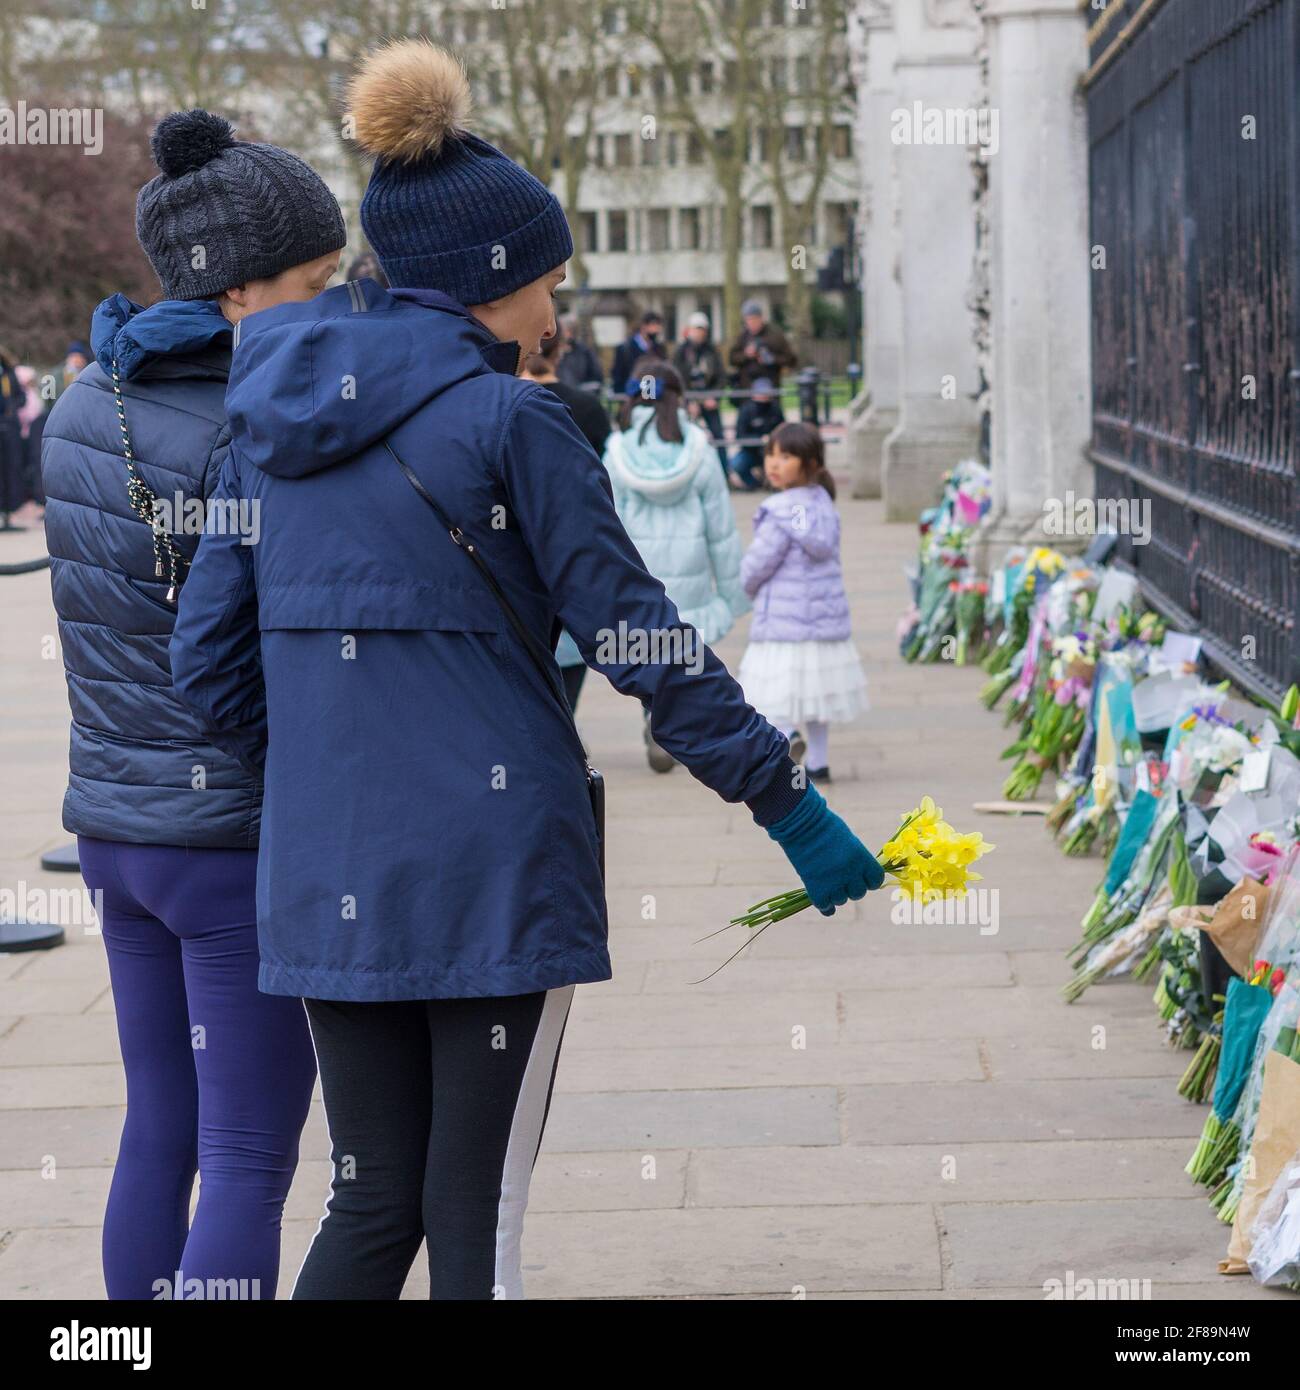 People paying their respects to His Royal Highness Prince Philip The Duke of Edinburgh outside of Buckingham Palace at the announcement of his death. Stock Photo